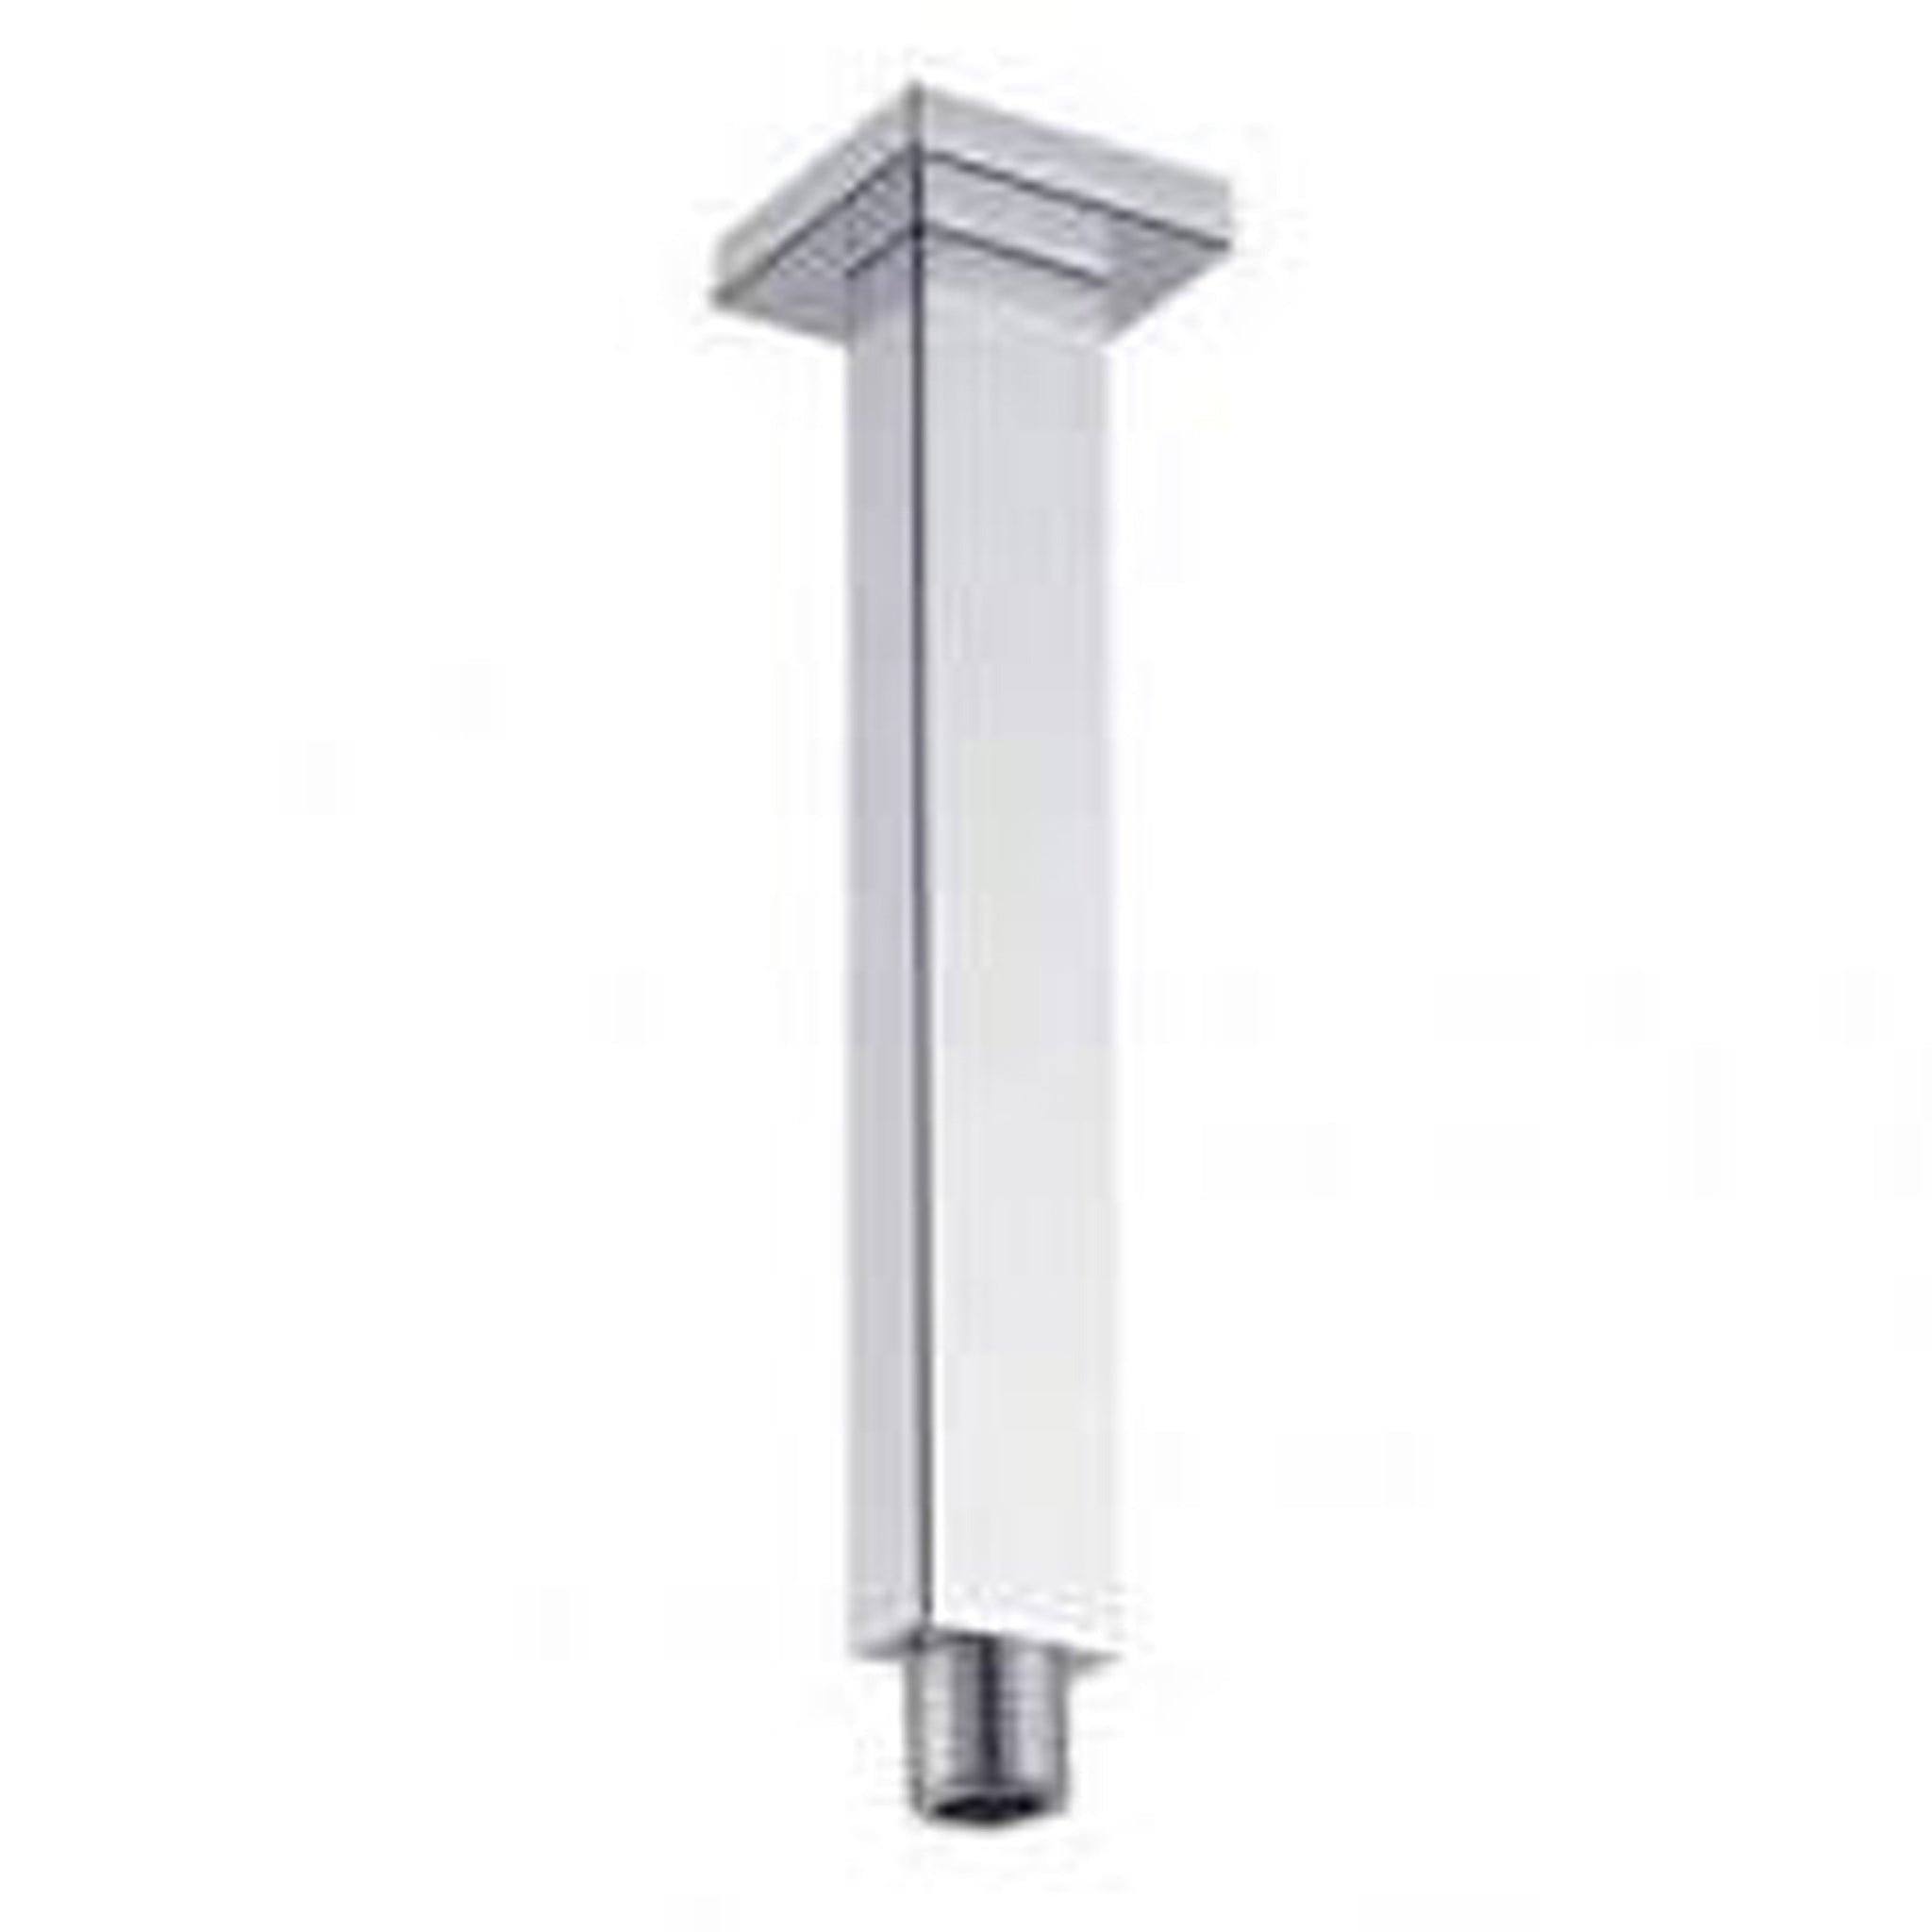 Aquamoon 4" Shower arm Ceiling Square Brush Nickel with Flange